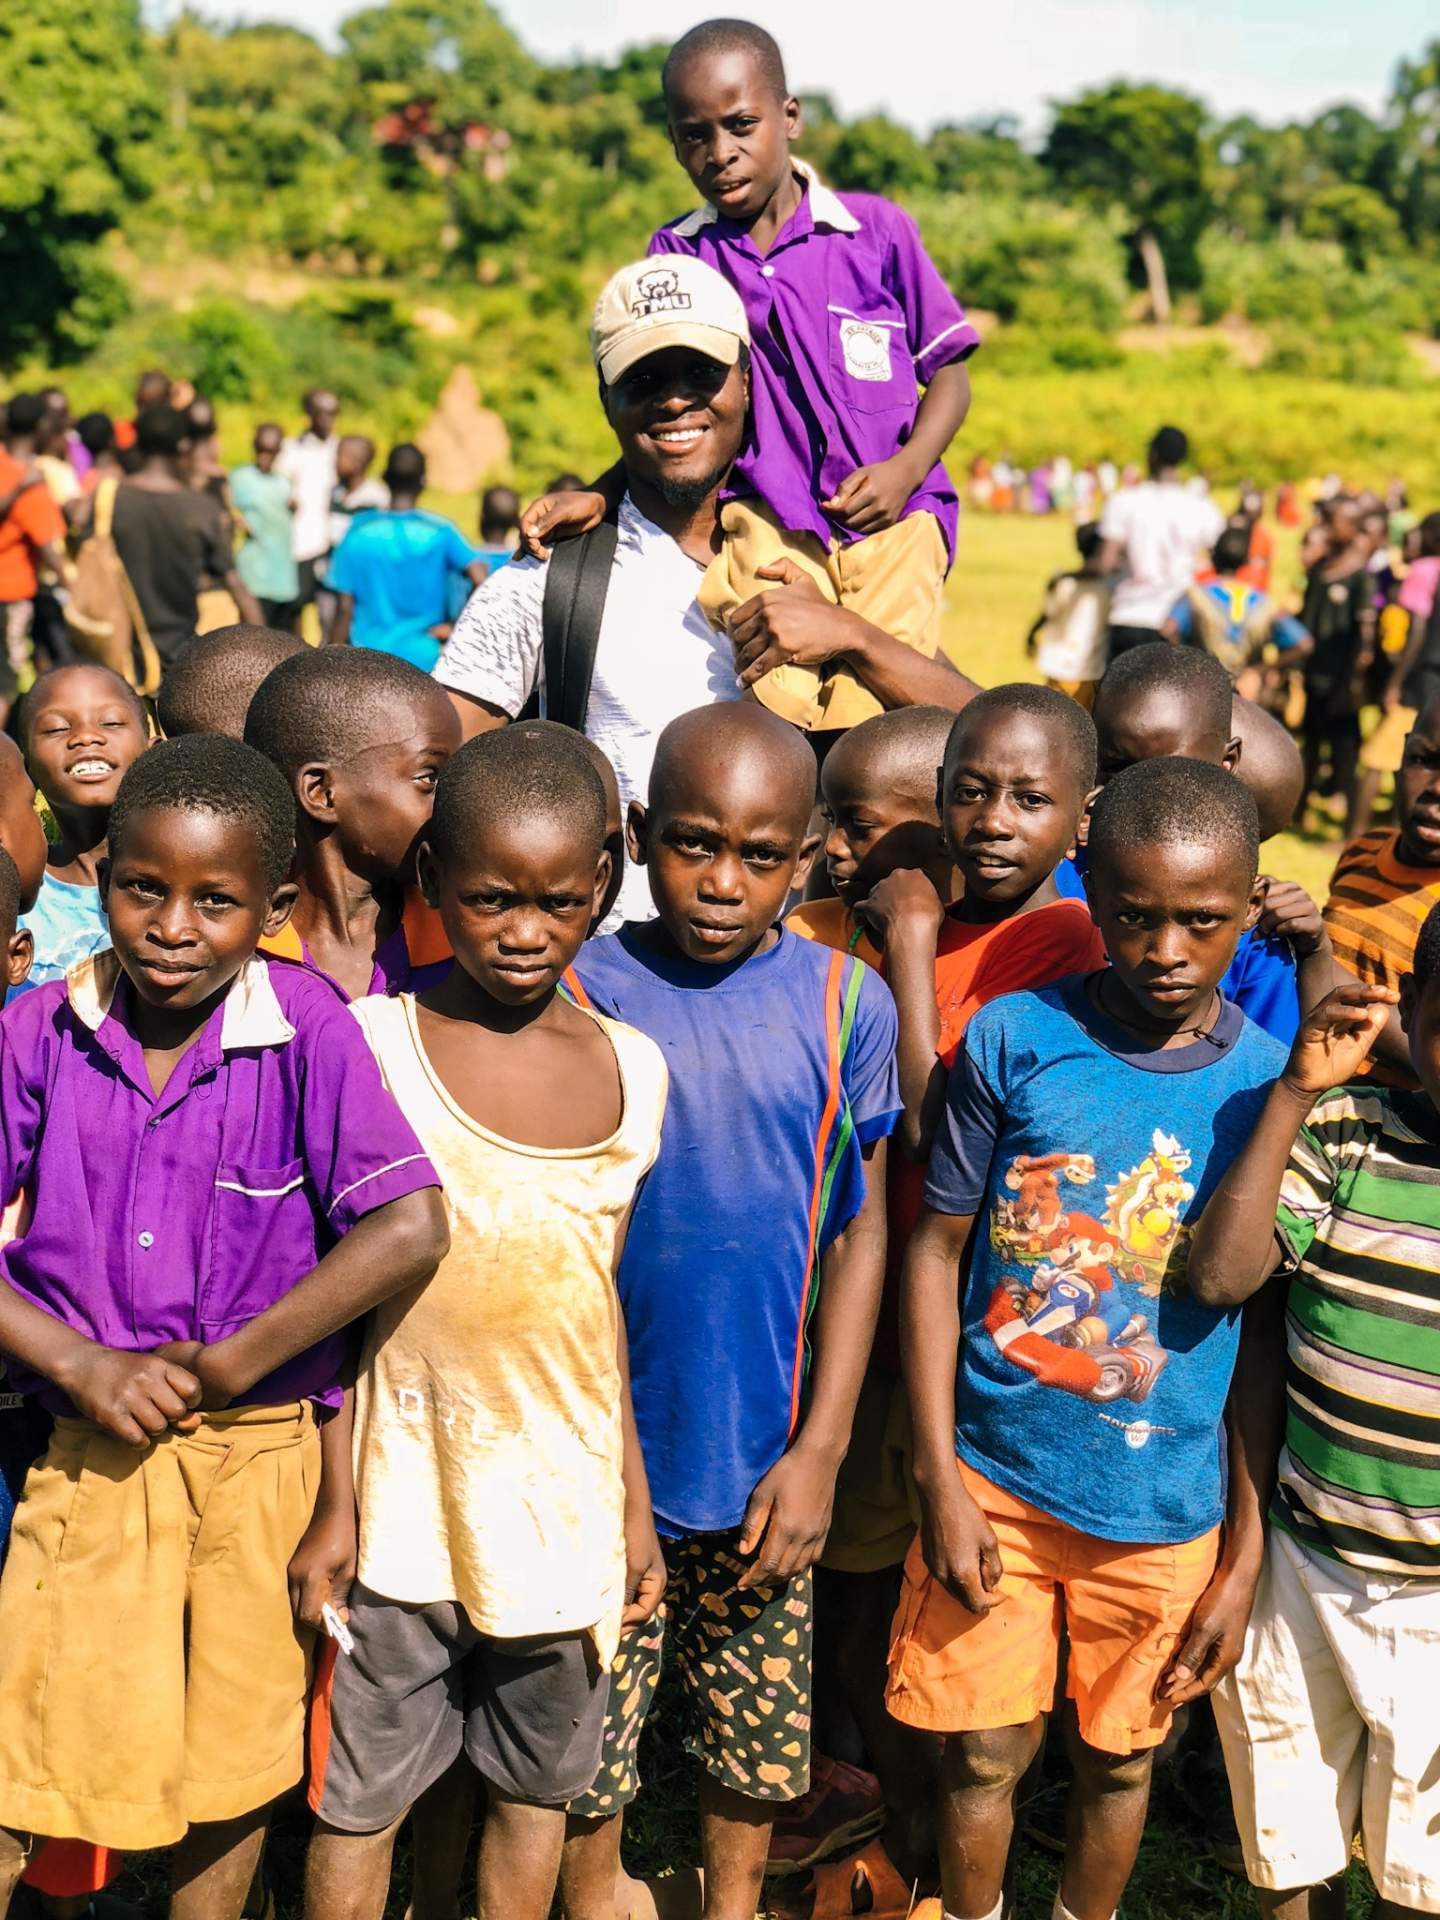 Patrick Ssebulime and the Children of Uganda